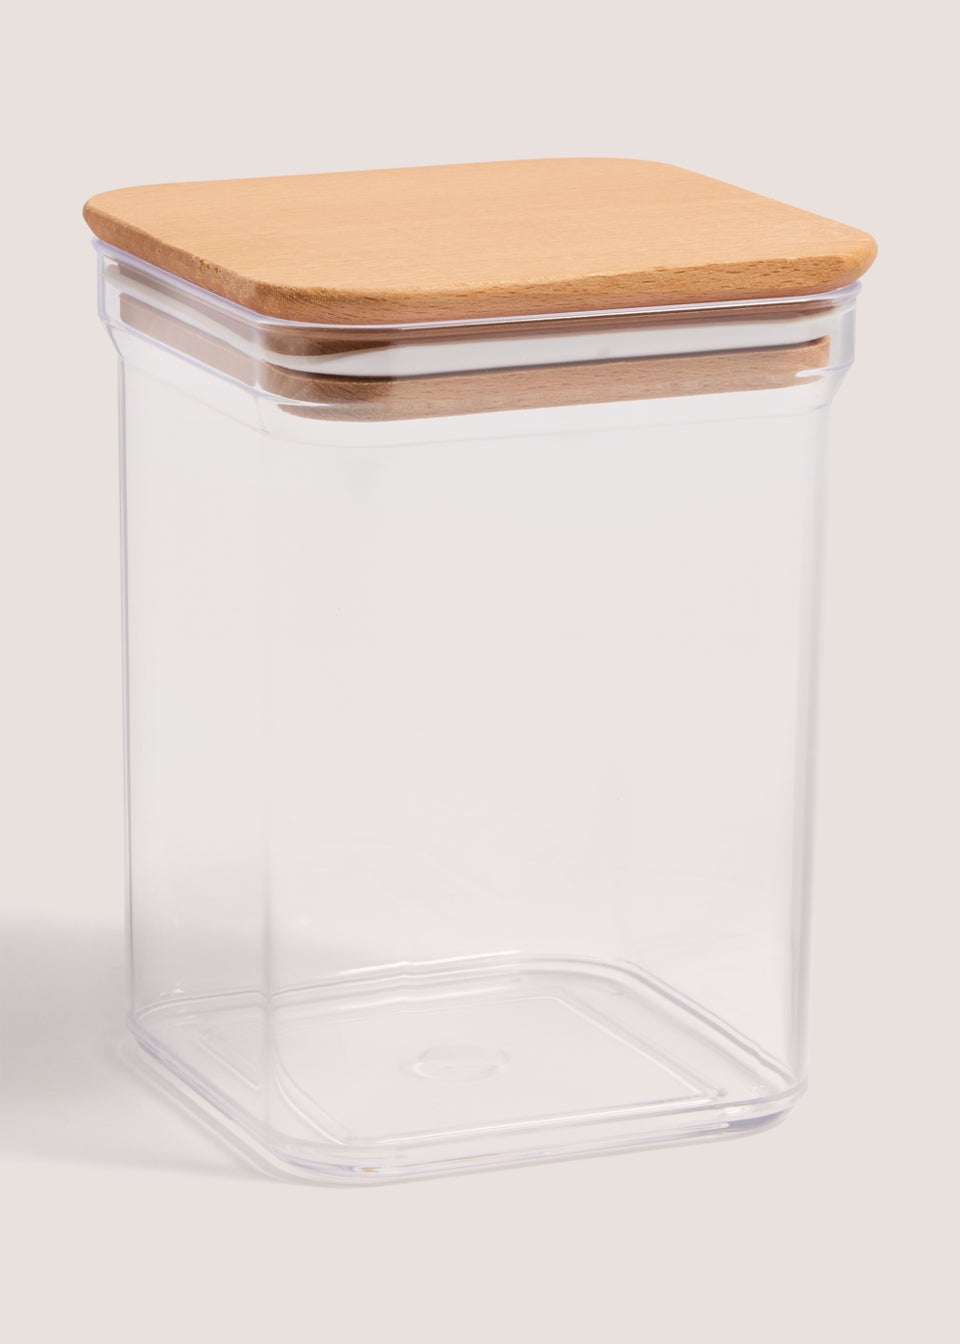 Clear Plastic Food Storage with Wooden Lid (14cm x 10.5cm)